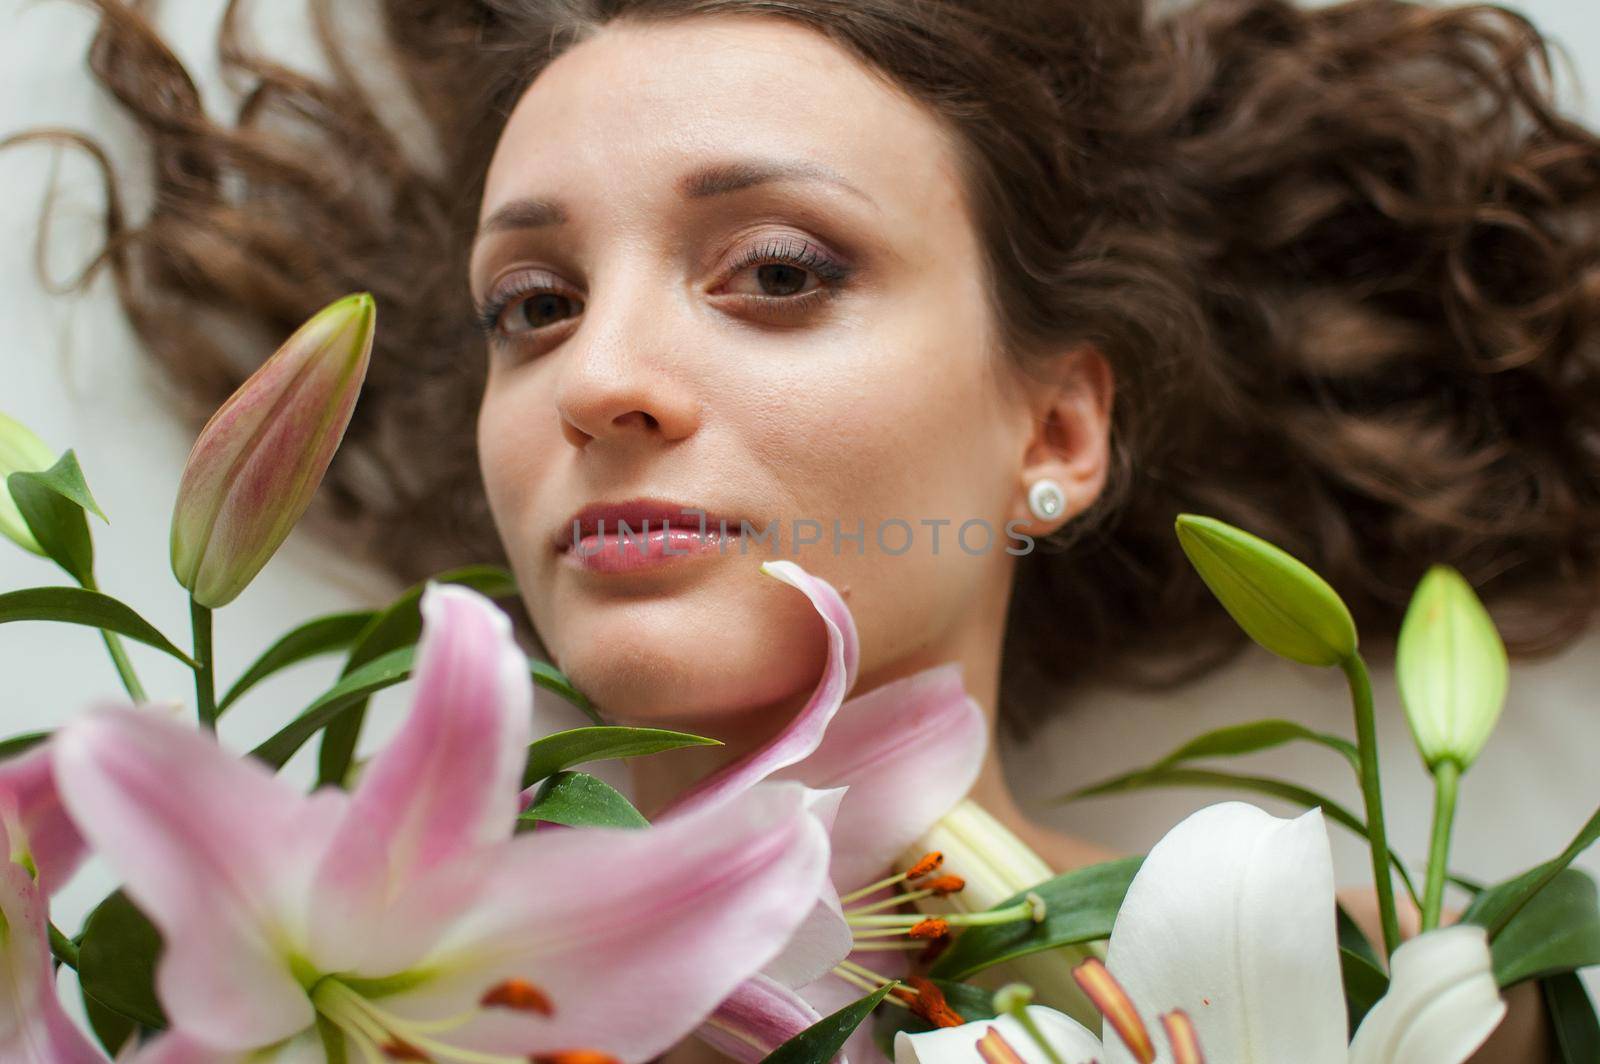 Top view of beautiful woman lying on the table with perfect bouquet of beautiful lilies, female portrait concept.